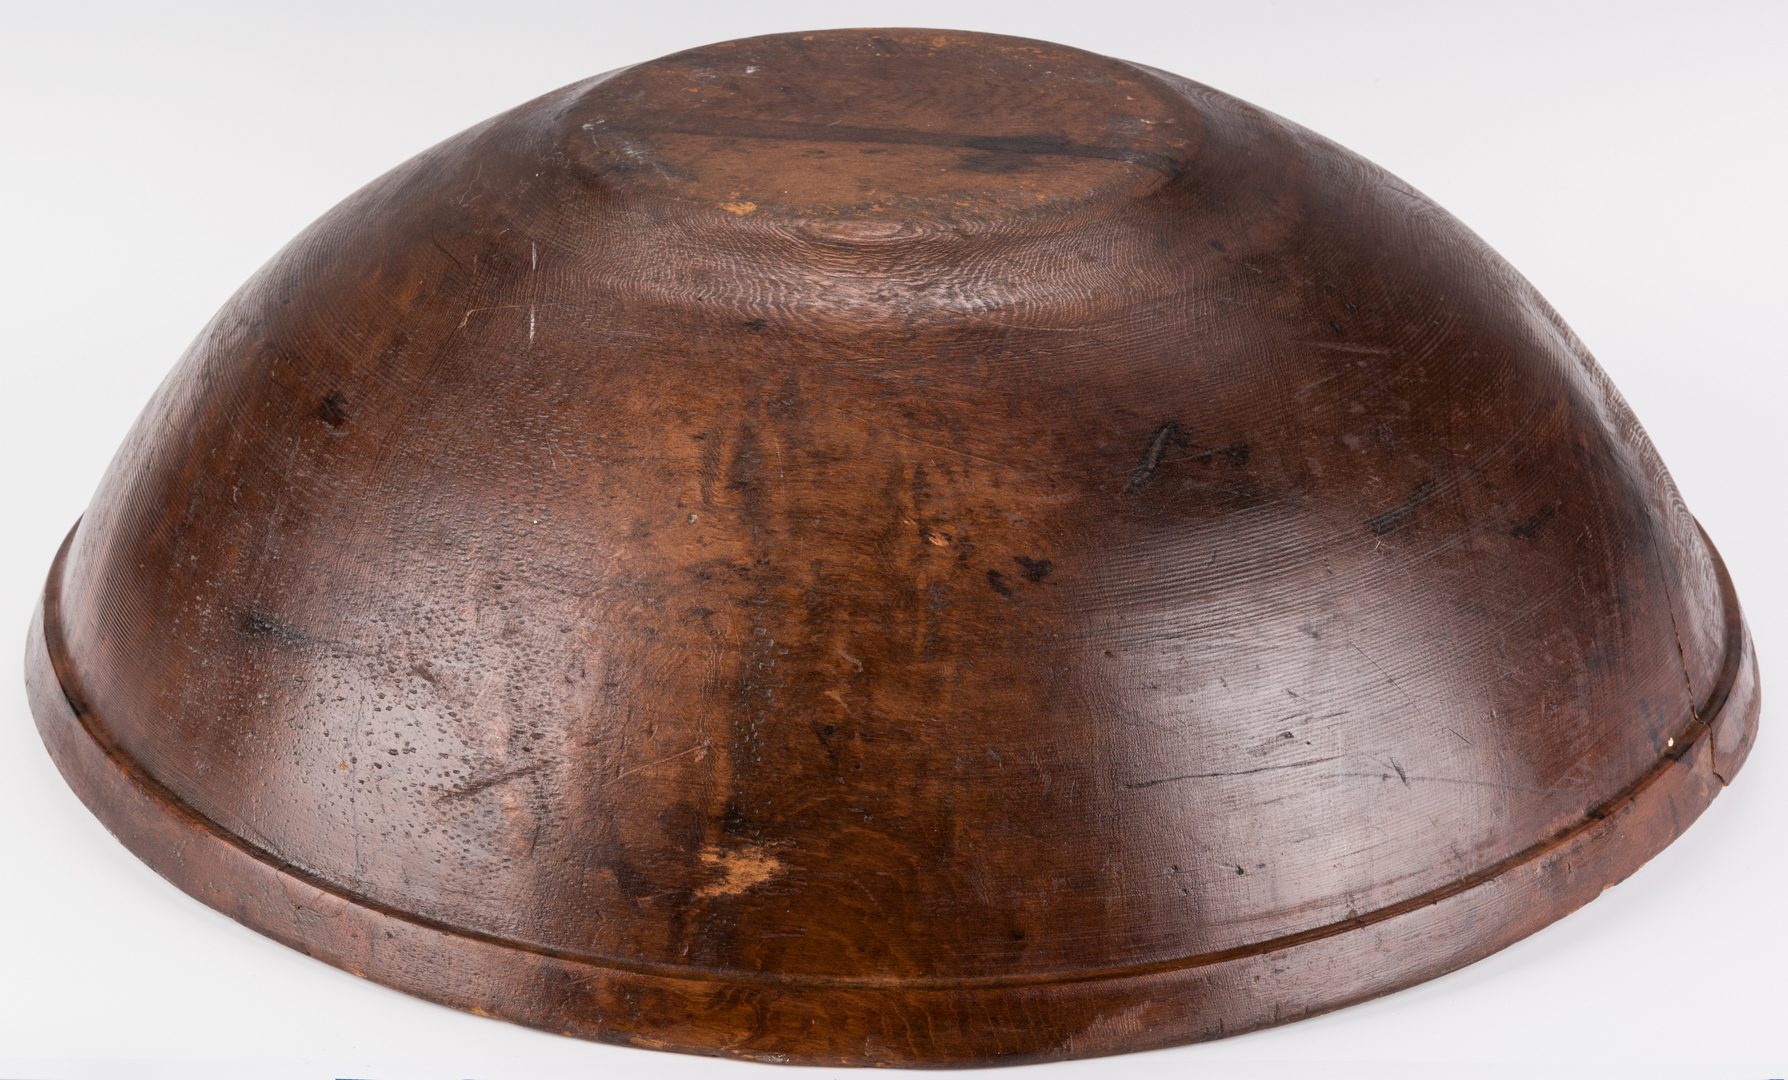 Lot 226: Large Turned Wooden Bowl, American